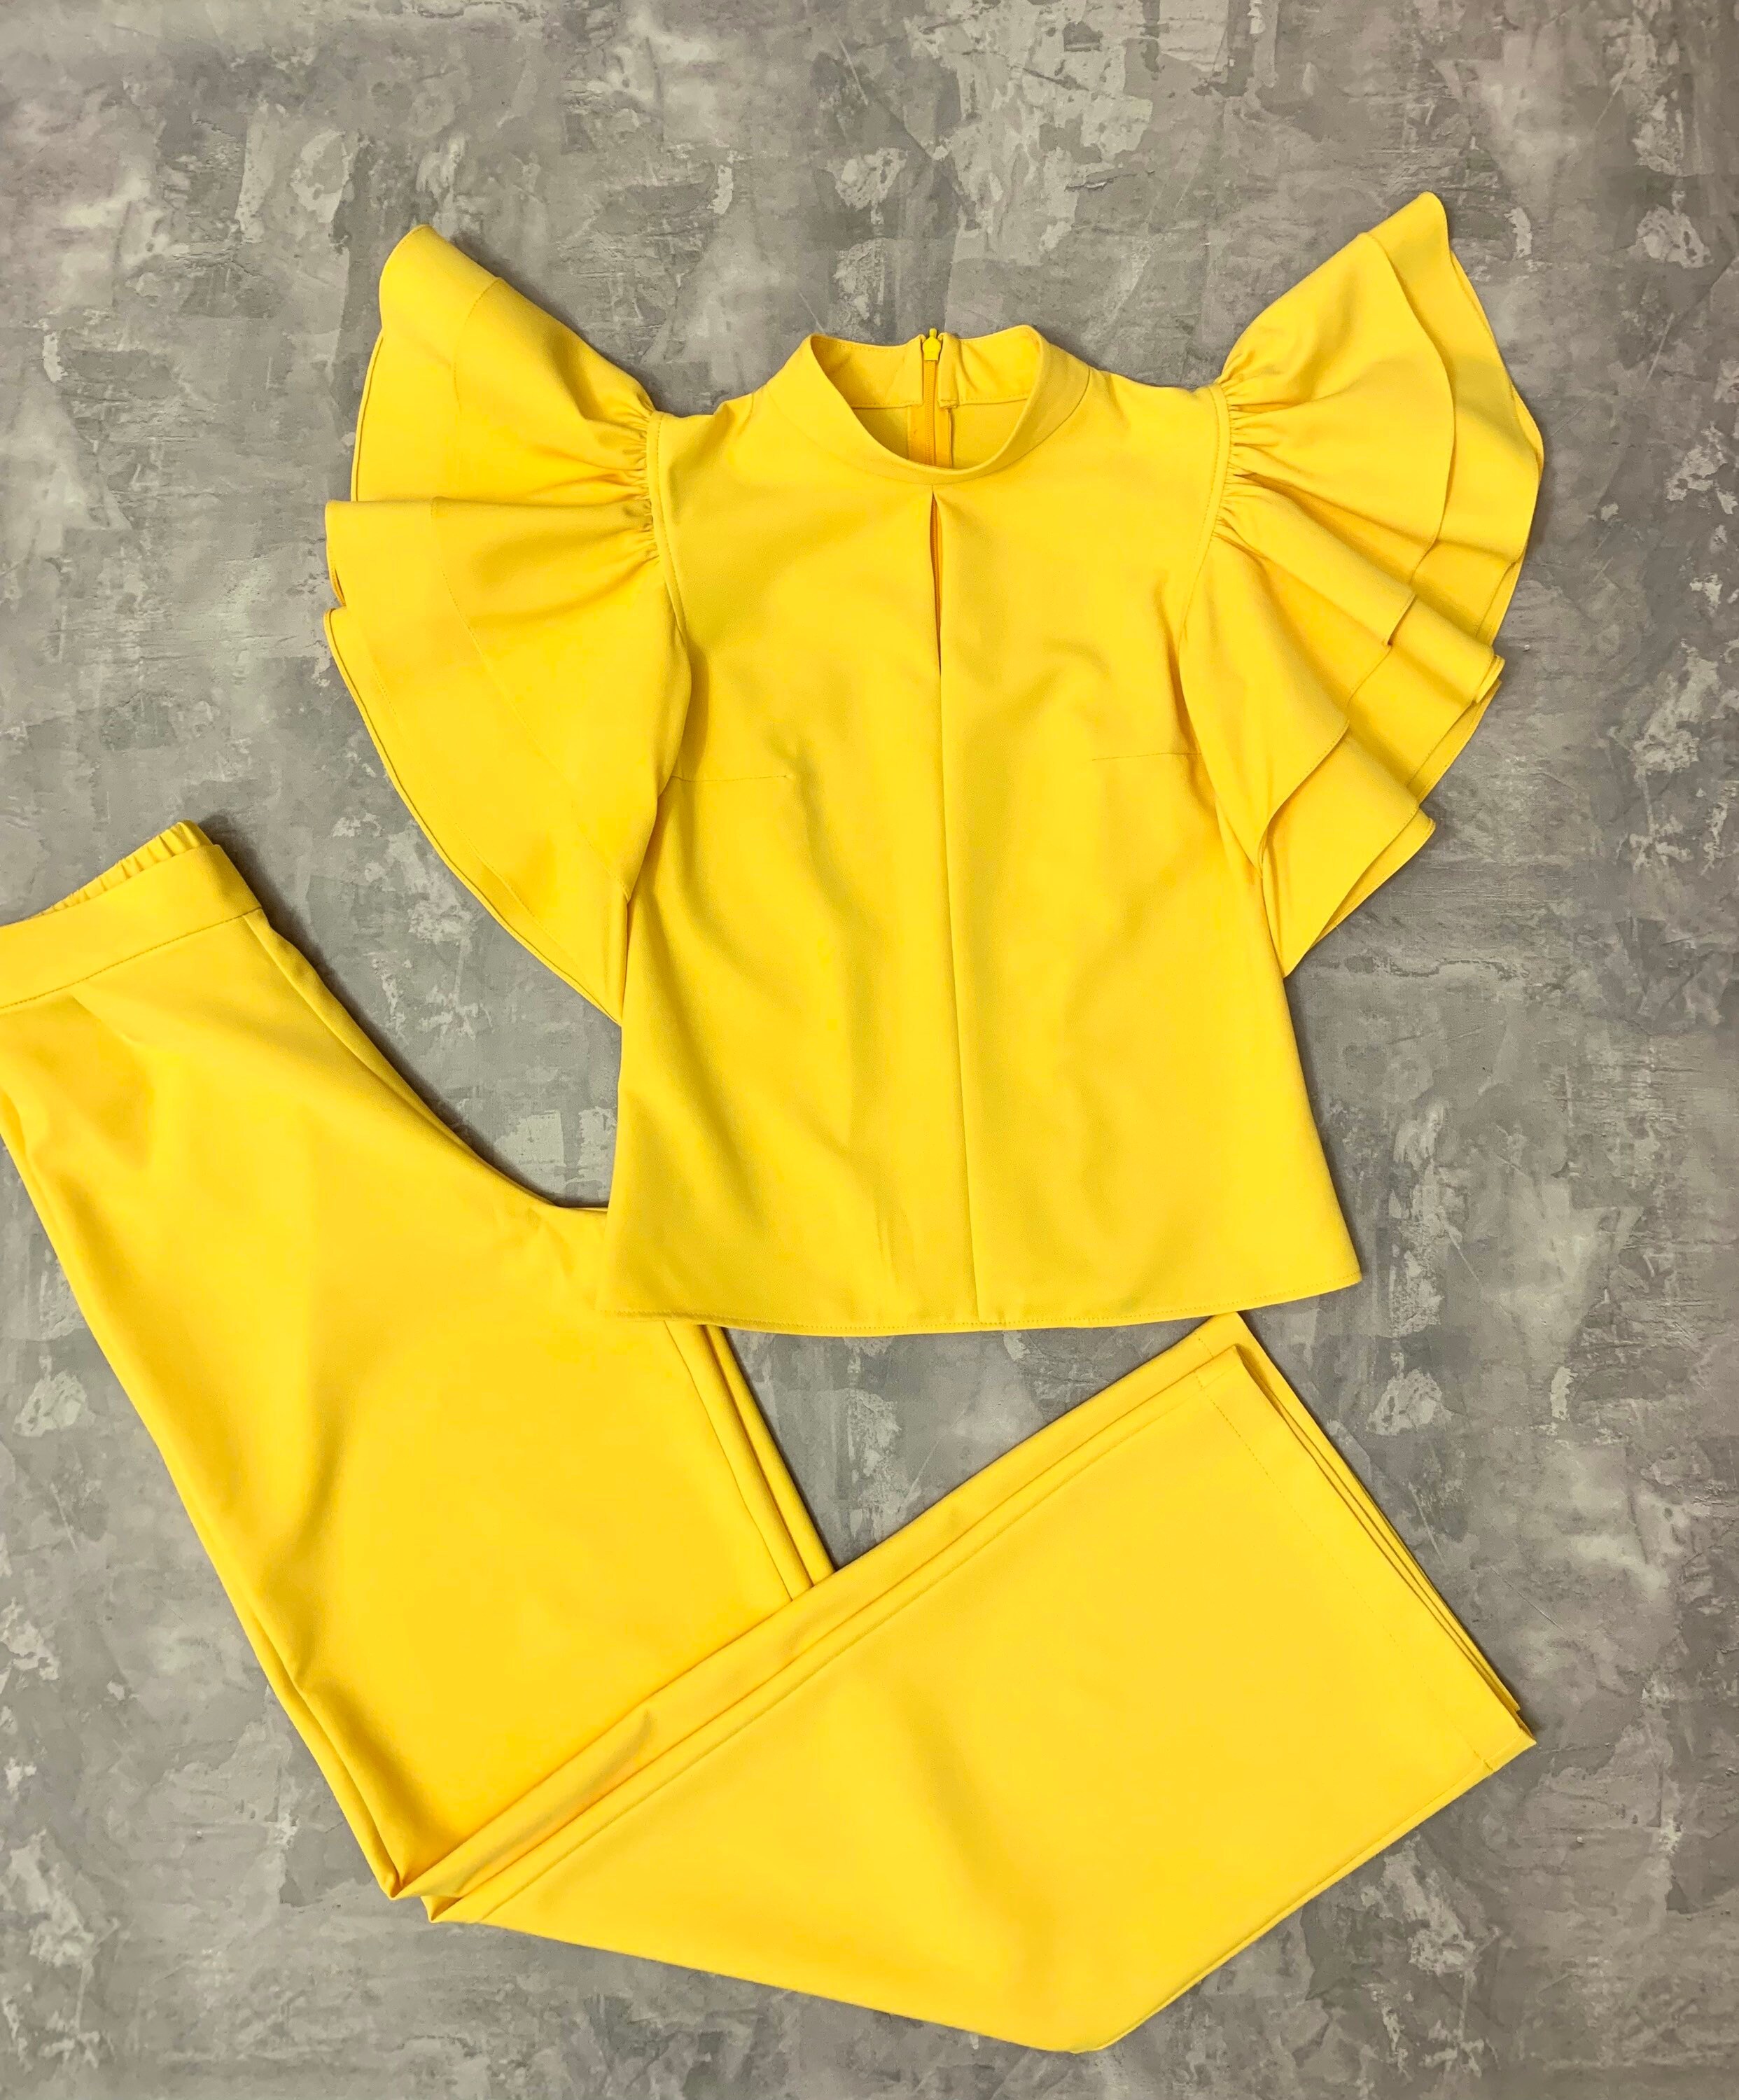 Hot Yellow Pageant Interview Pants Suit With Sleeves/ Top and - Etsy